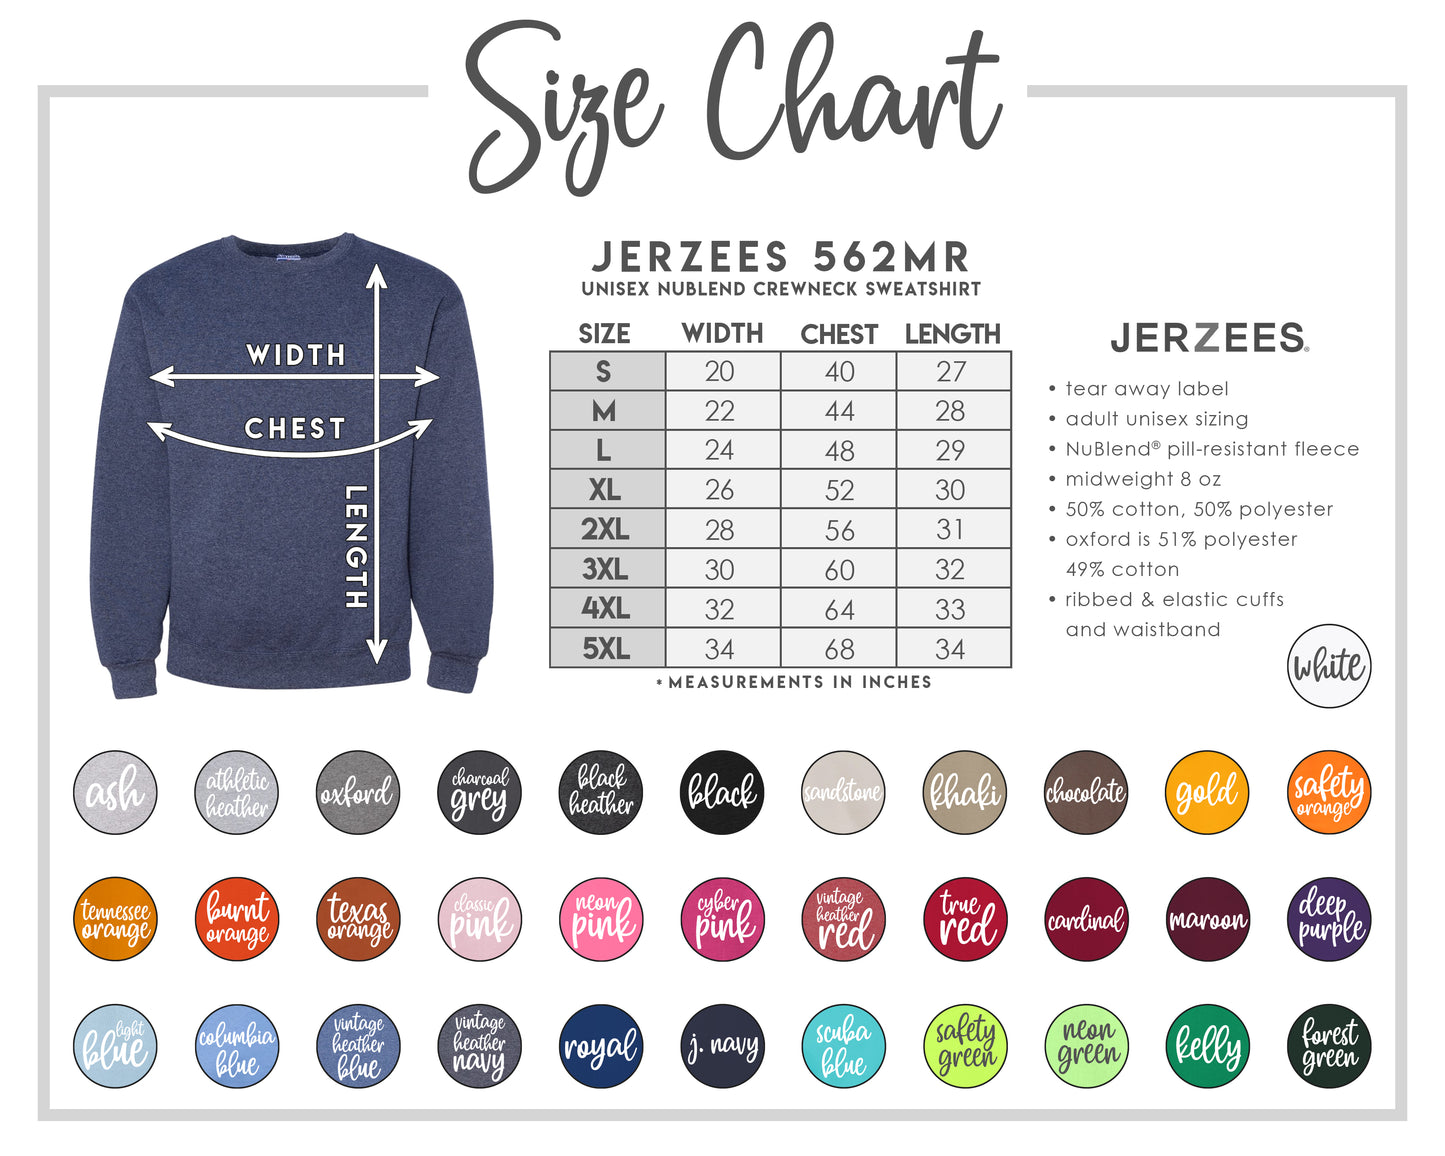 But First, CFA -- Tee OR Crewneck!, Embroidered, Add Your Monogram